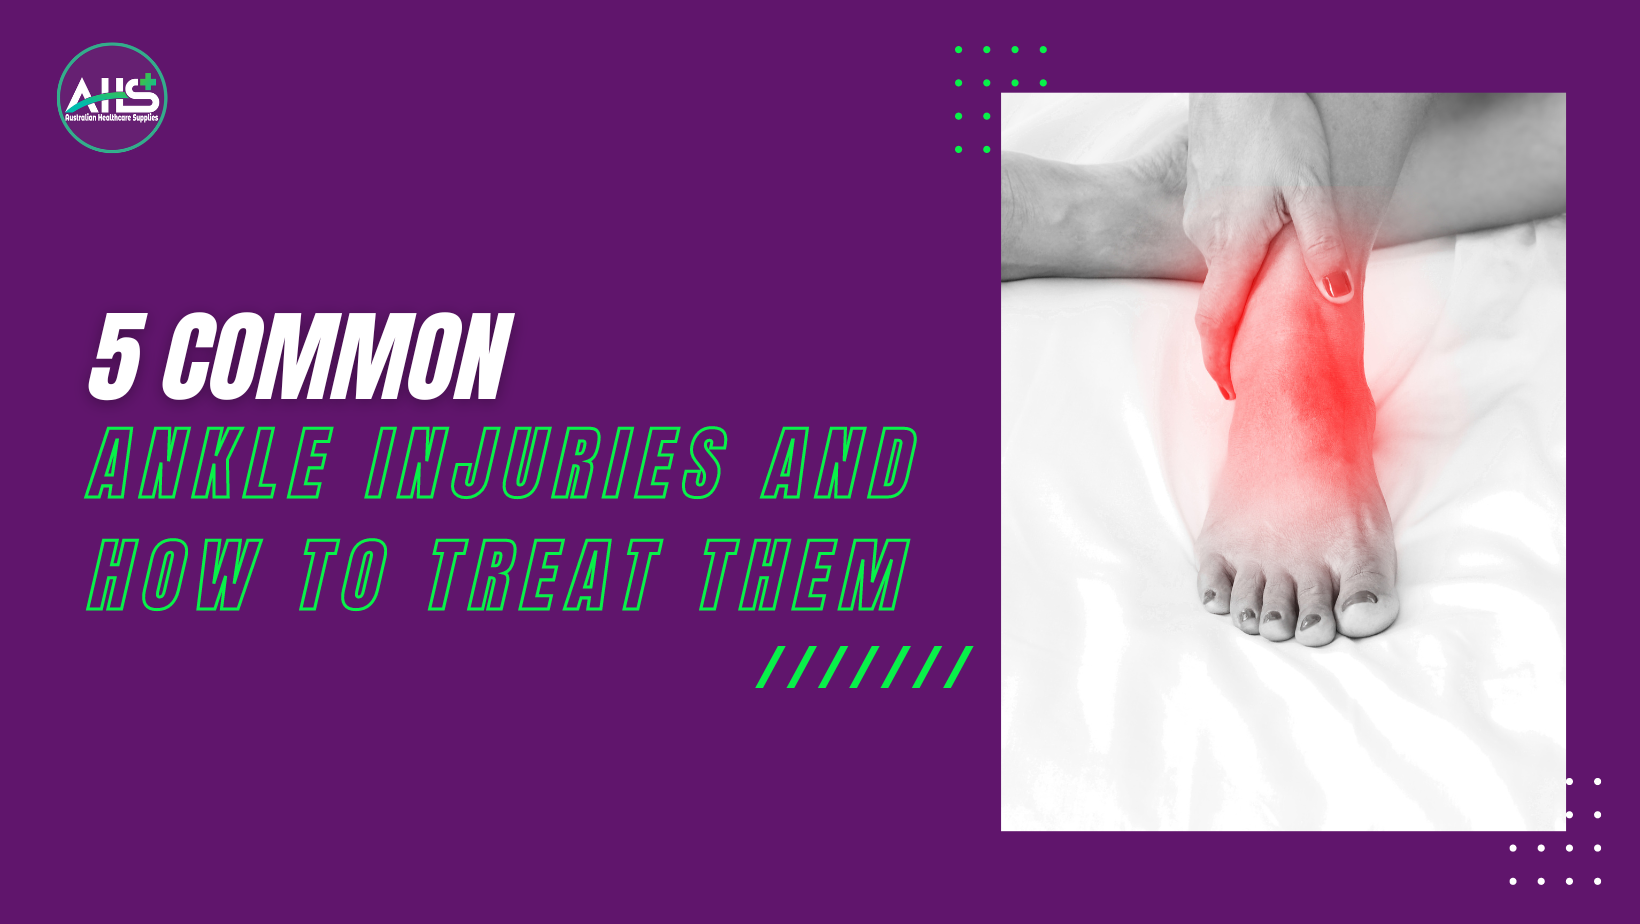 5 common ankle injury